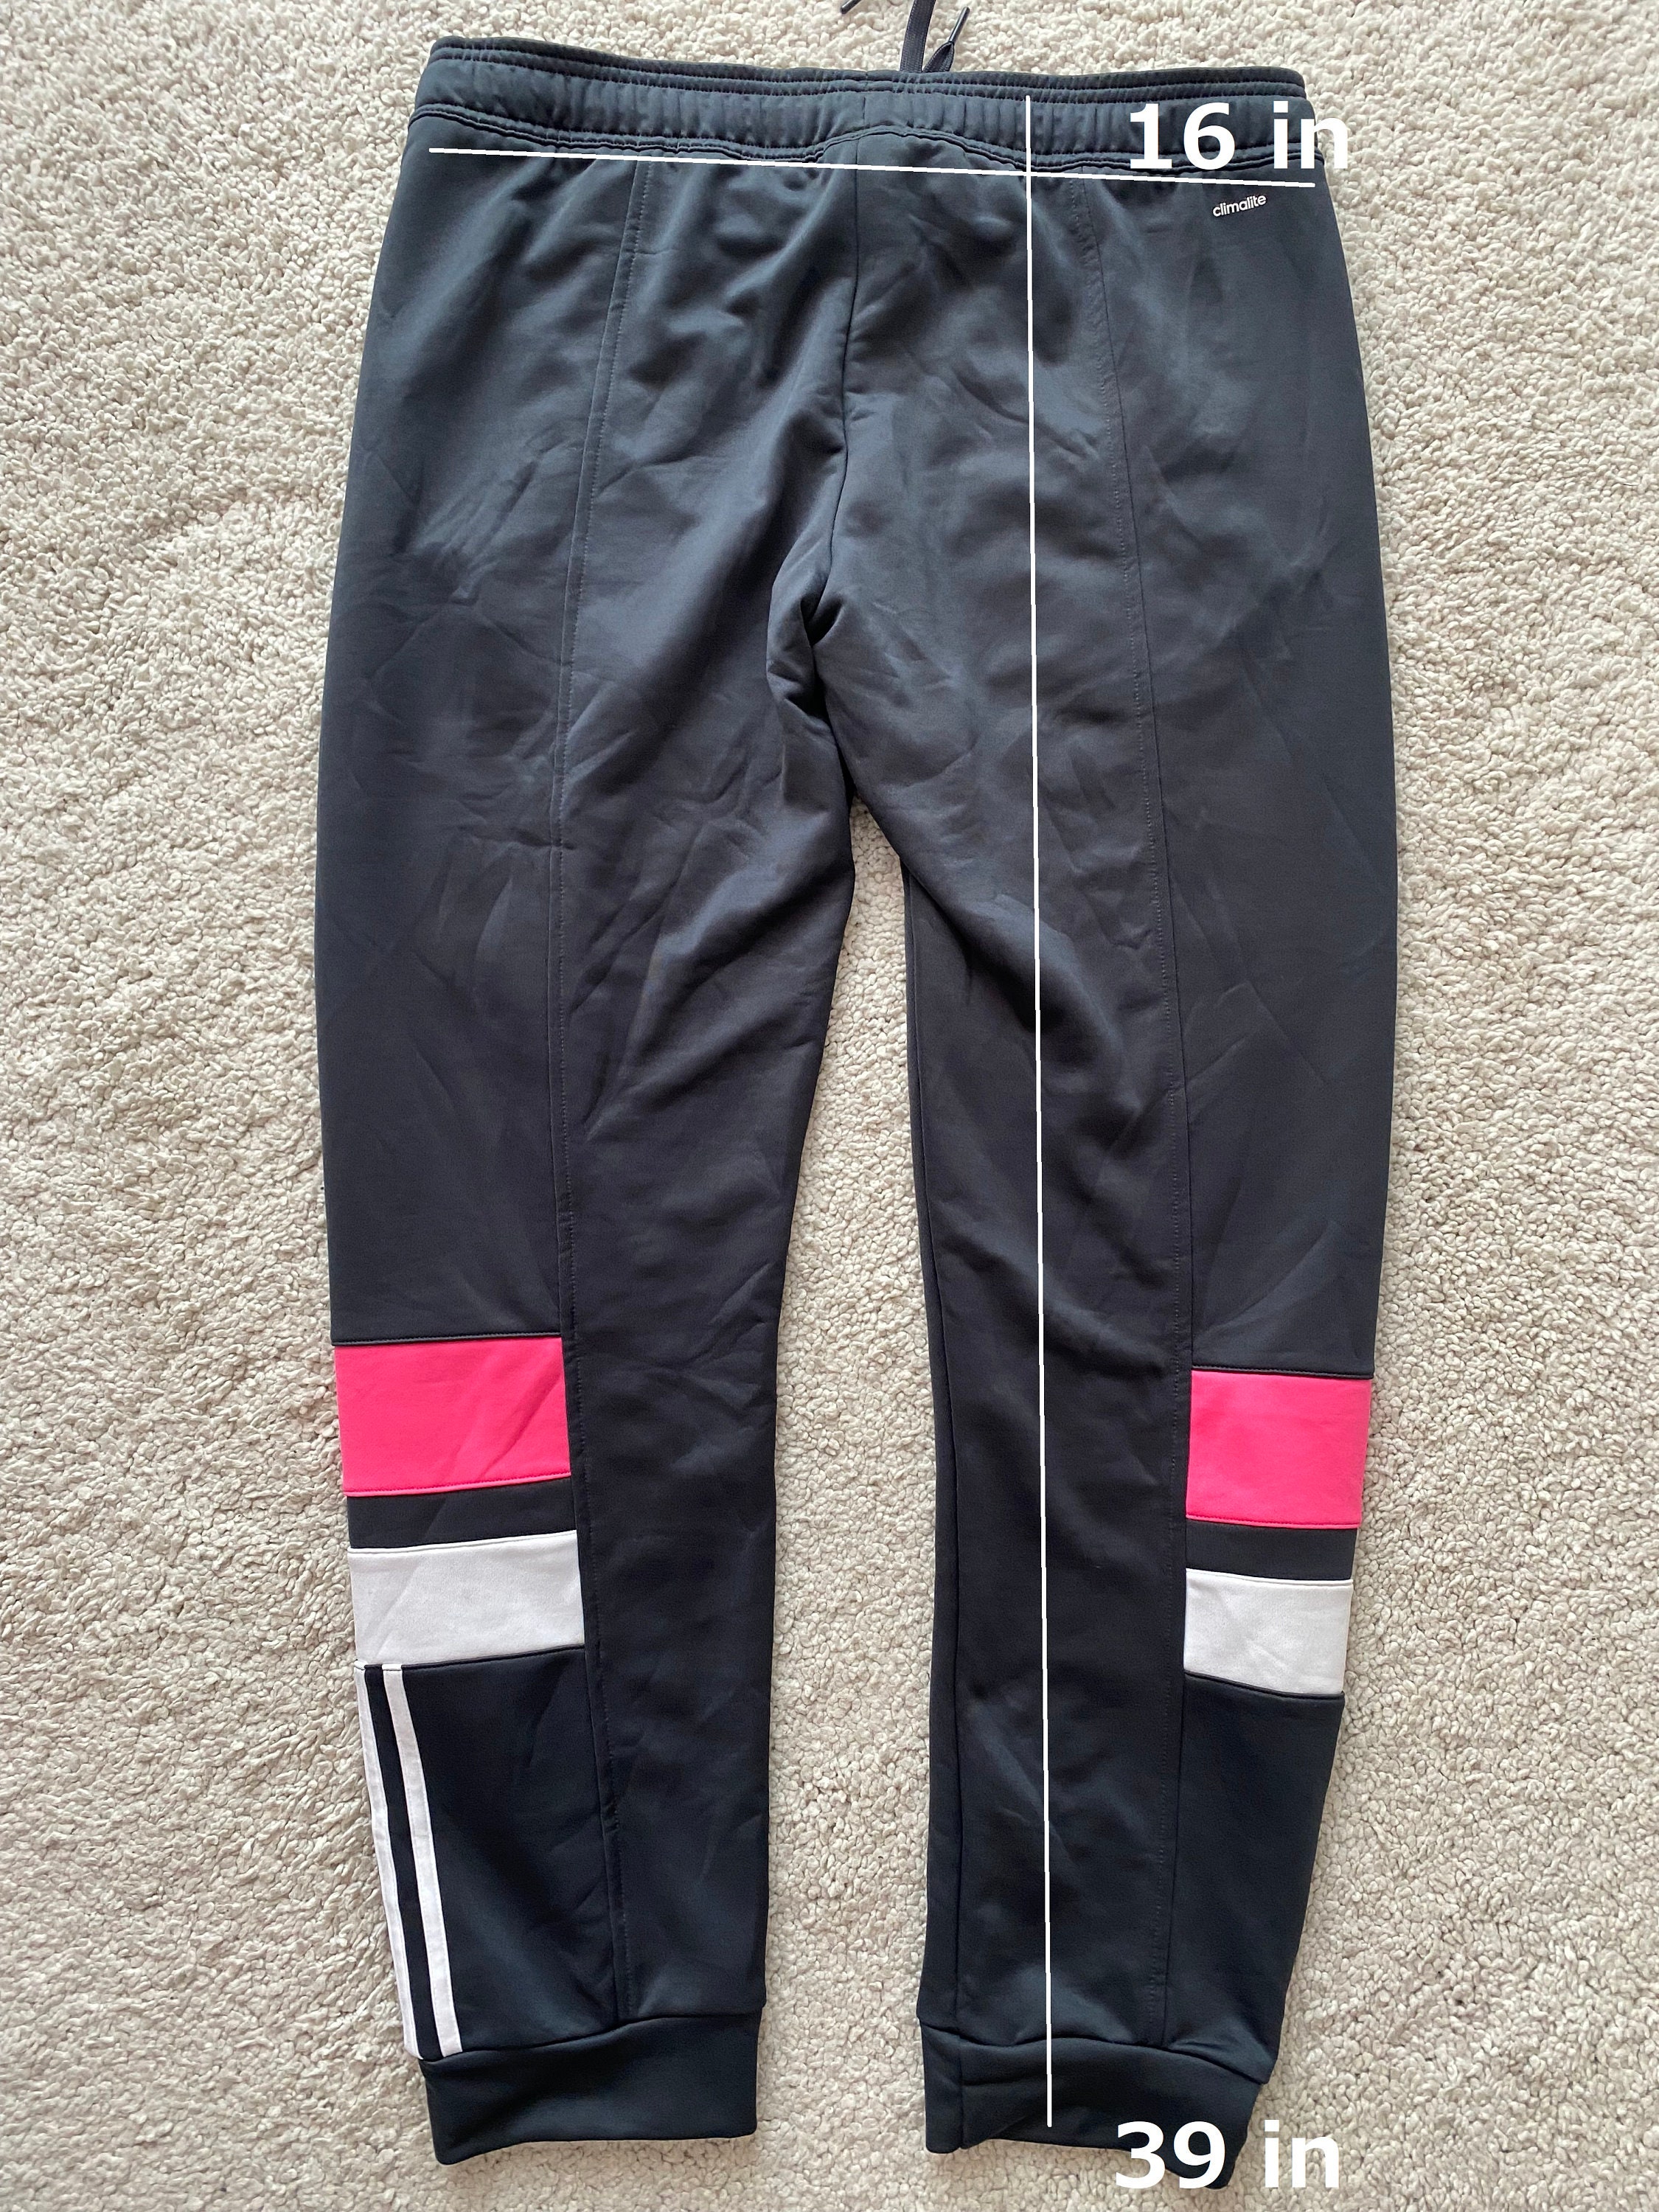 Adidas Womens Track Pants Trousers Training GYM Gray Pink - Etsy